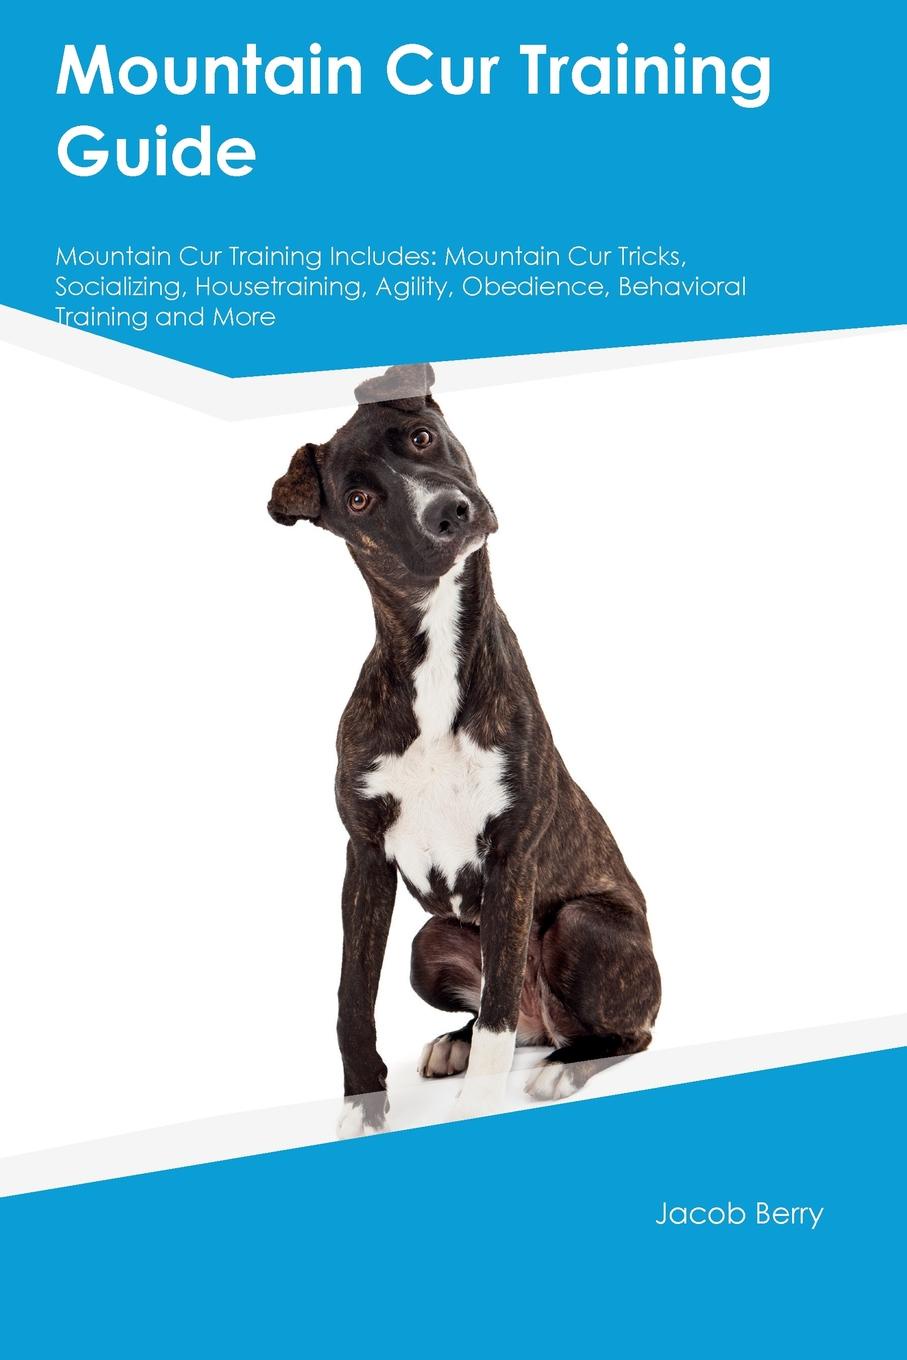 Mountain Cur Training Guide Mountain Cur Training Includes. Mountain Cur Tricks, Socializing, Housetraining, Agility, Obedience, Behavioral Training and More